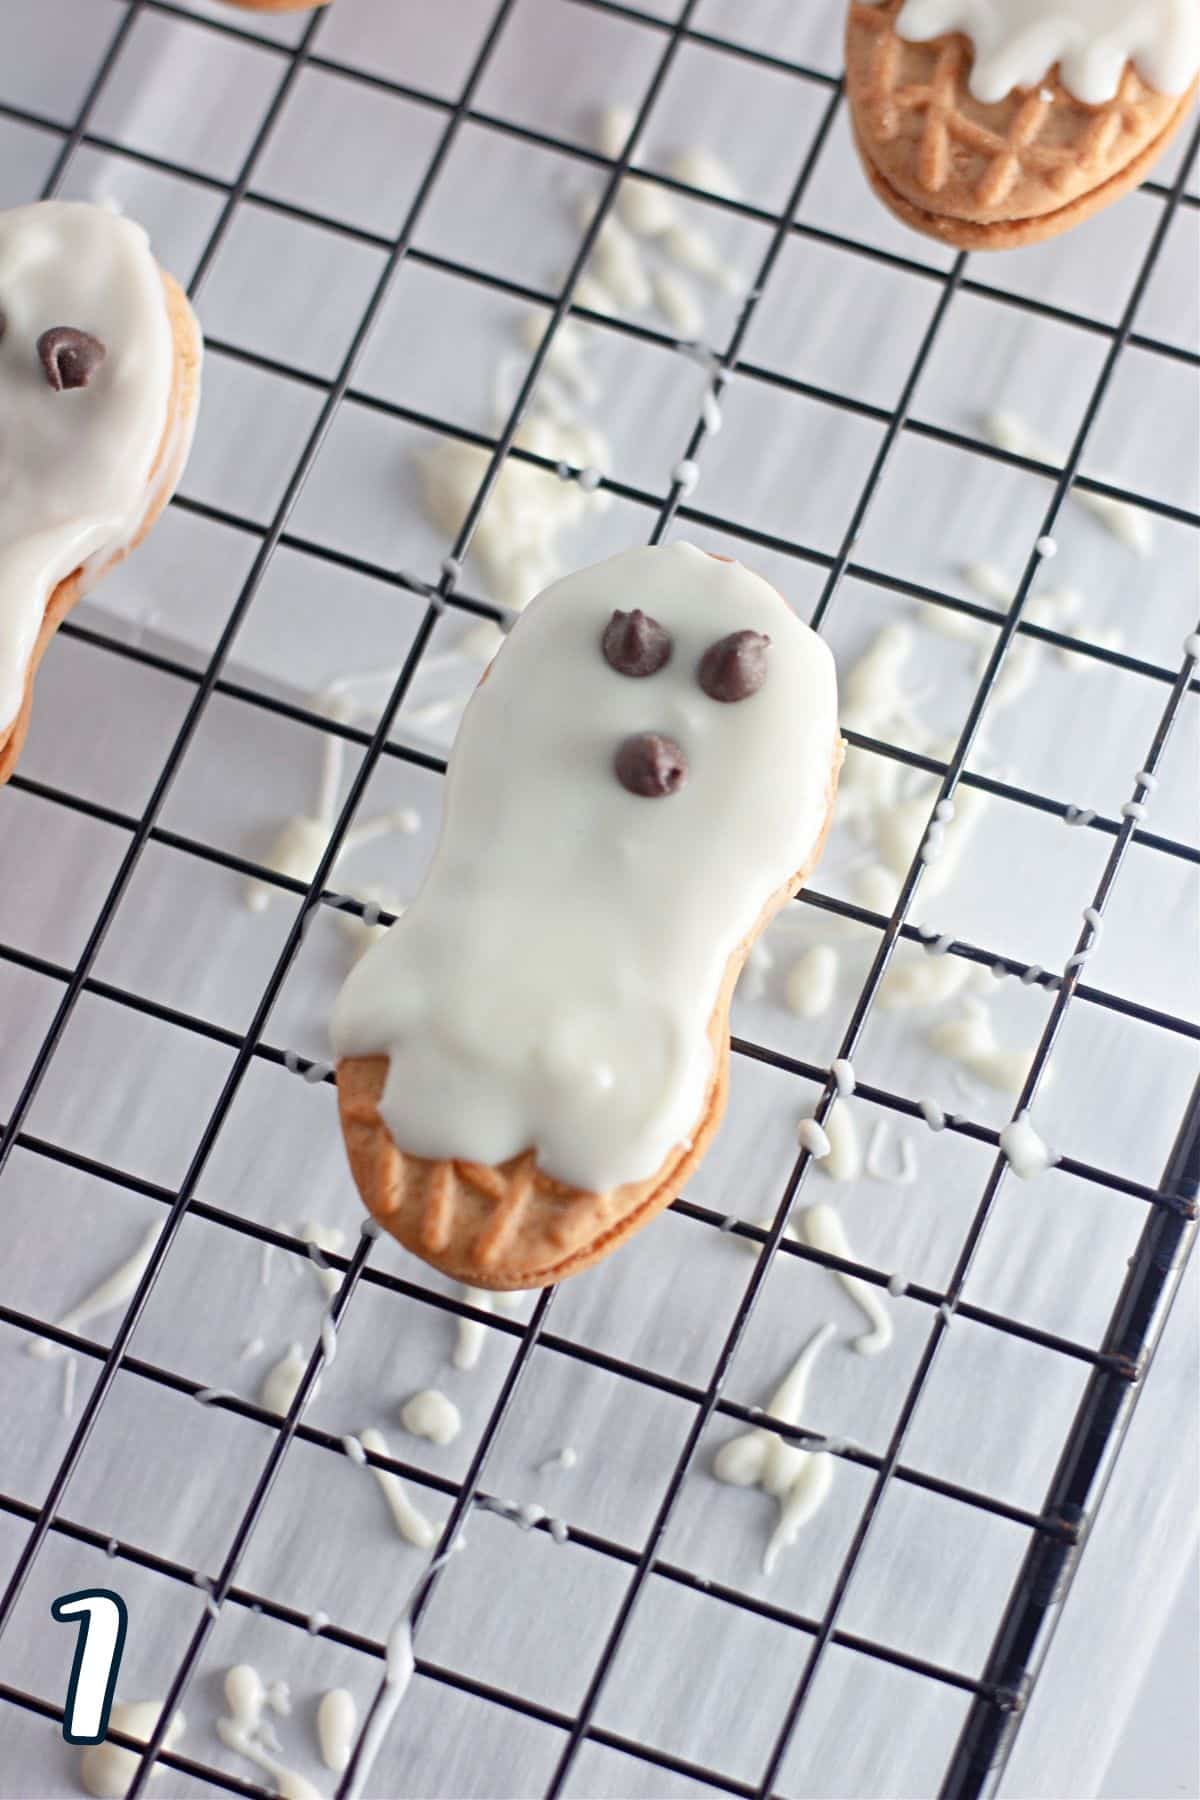 Mini chocolate chips used to make eyes and a mouth for a ghost on a cookie coated with white melting chocolate. 